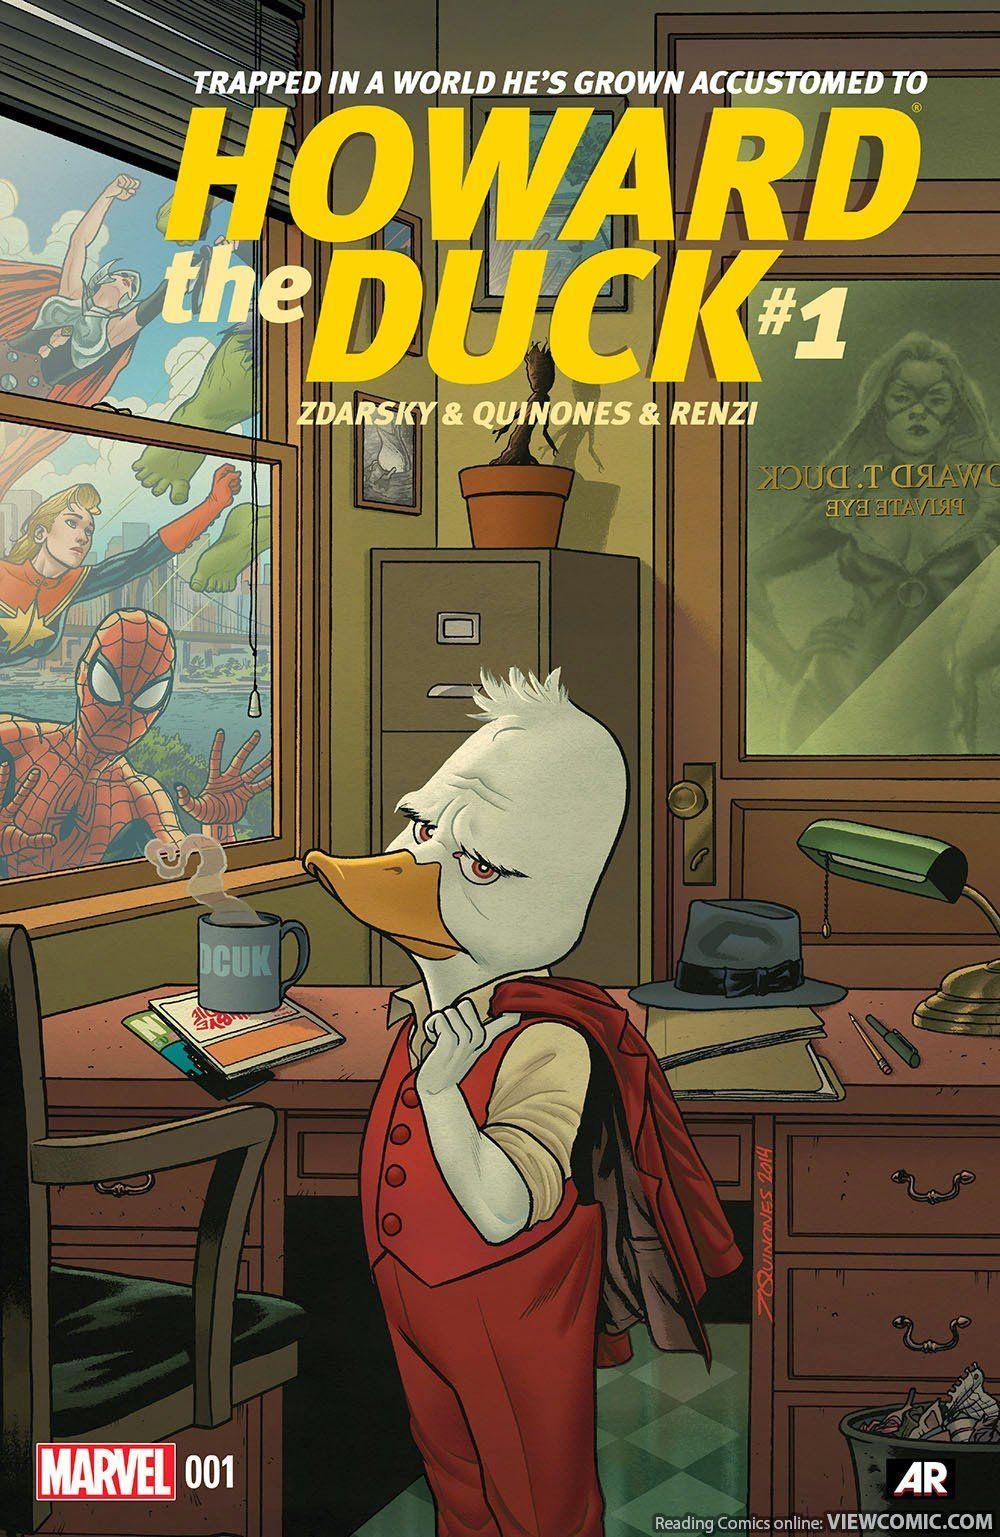 Bug reccomend howard the duck